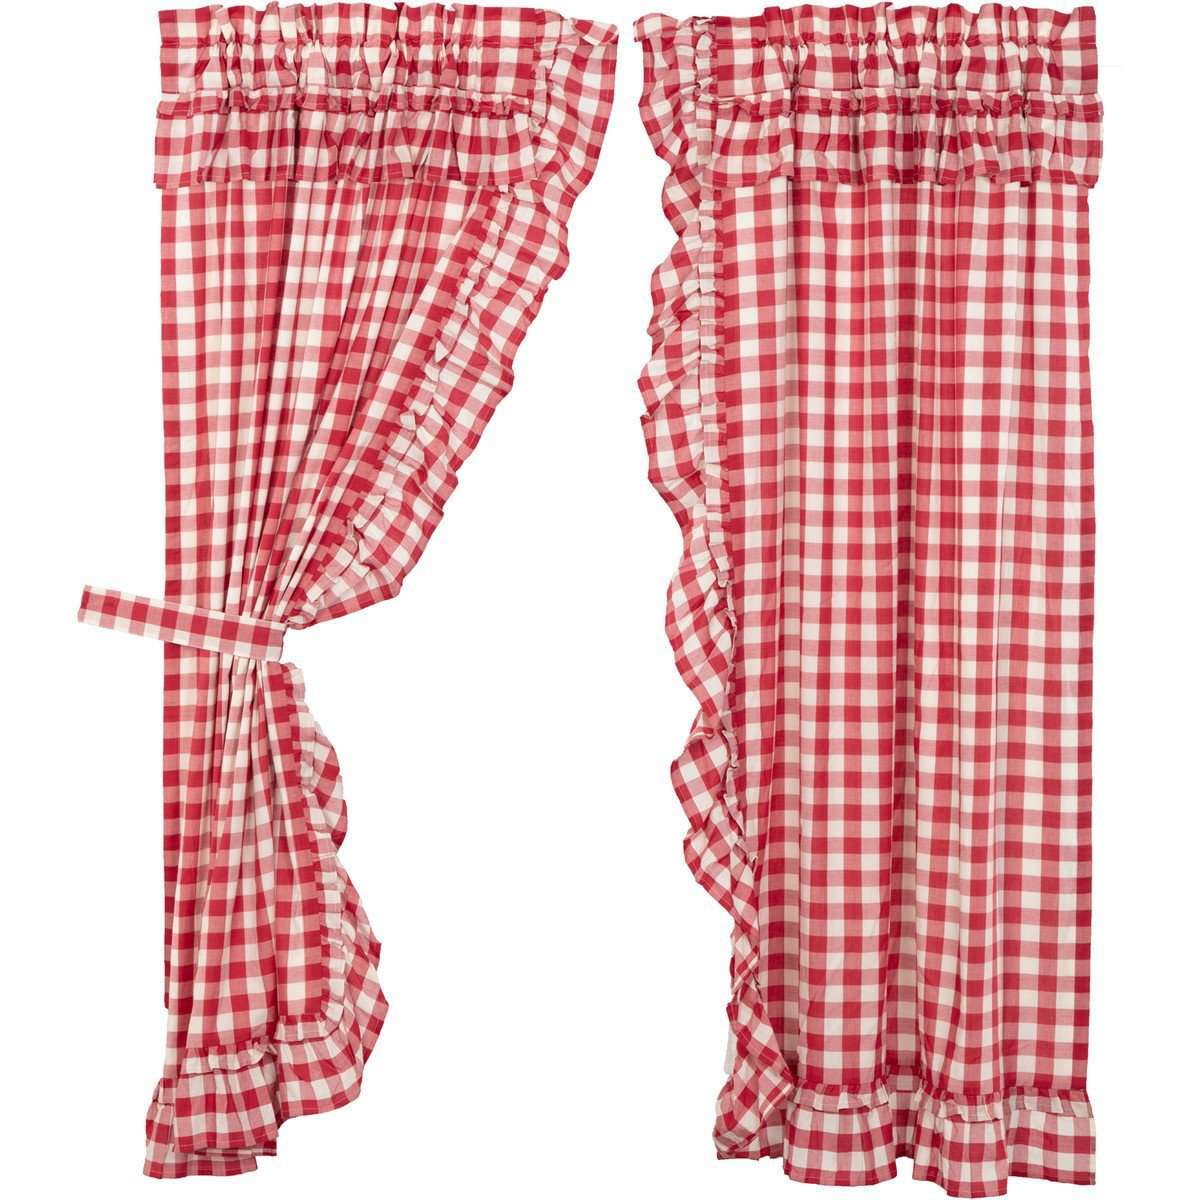 Annie Buffalo Red Check Ruffled Short Panel Curtain Set of 2 63"x36" VHC Brands - The Fox Decor